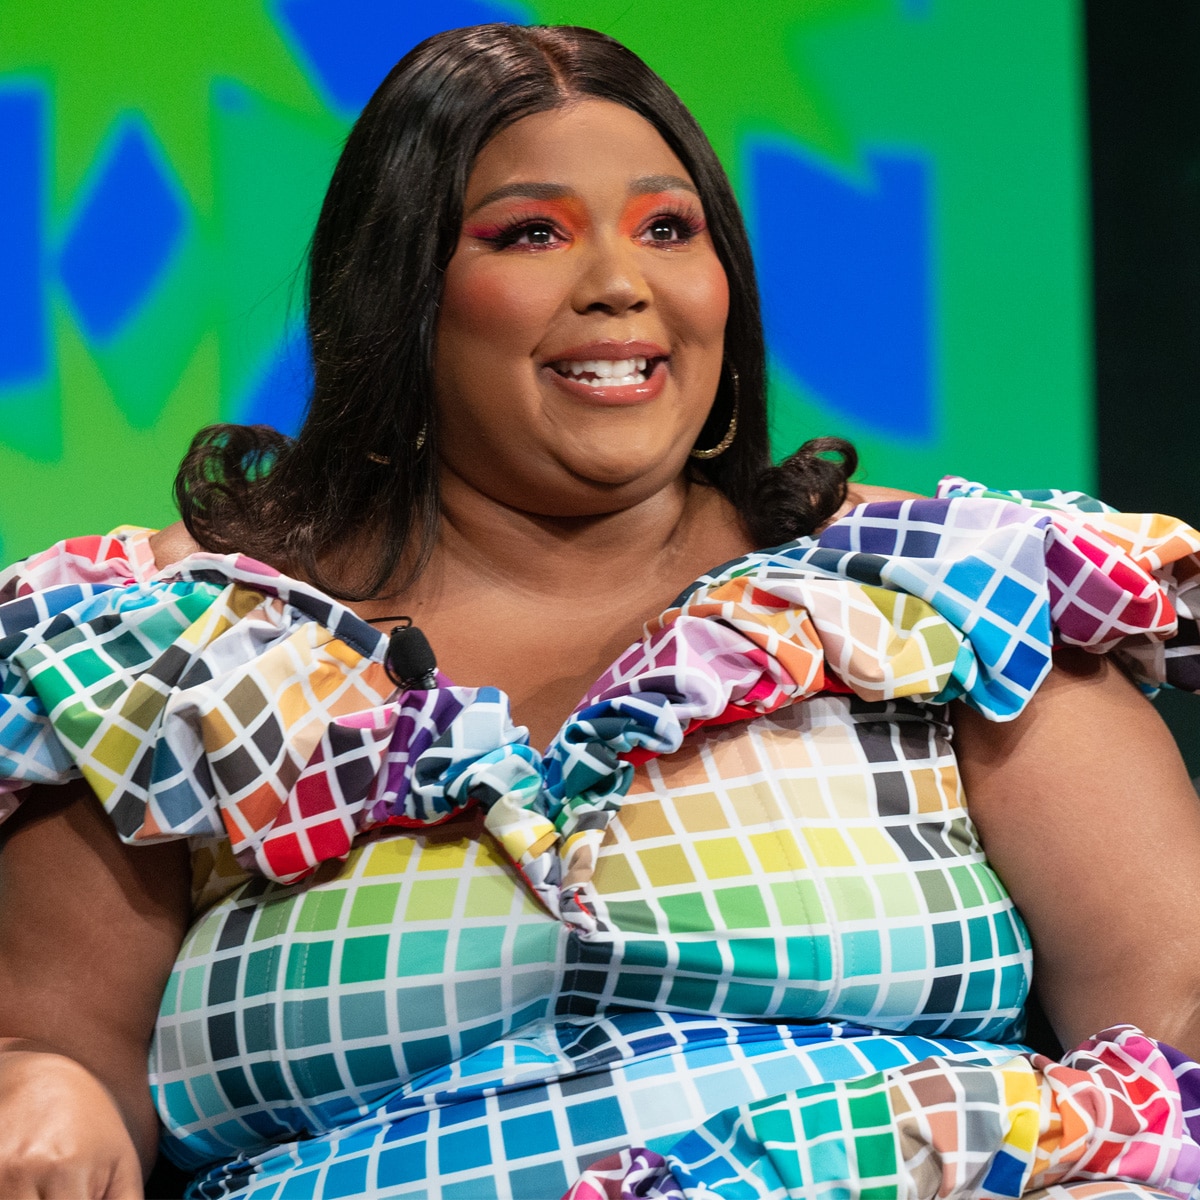 Lizzo Dresses Up As Chrisean Rock For Halloween